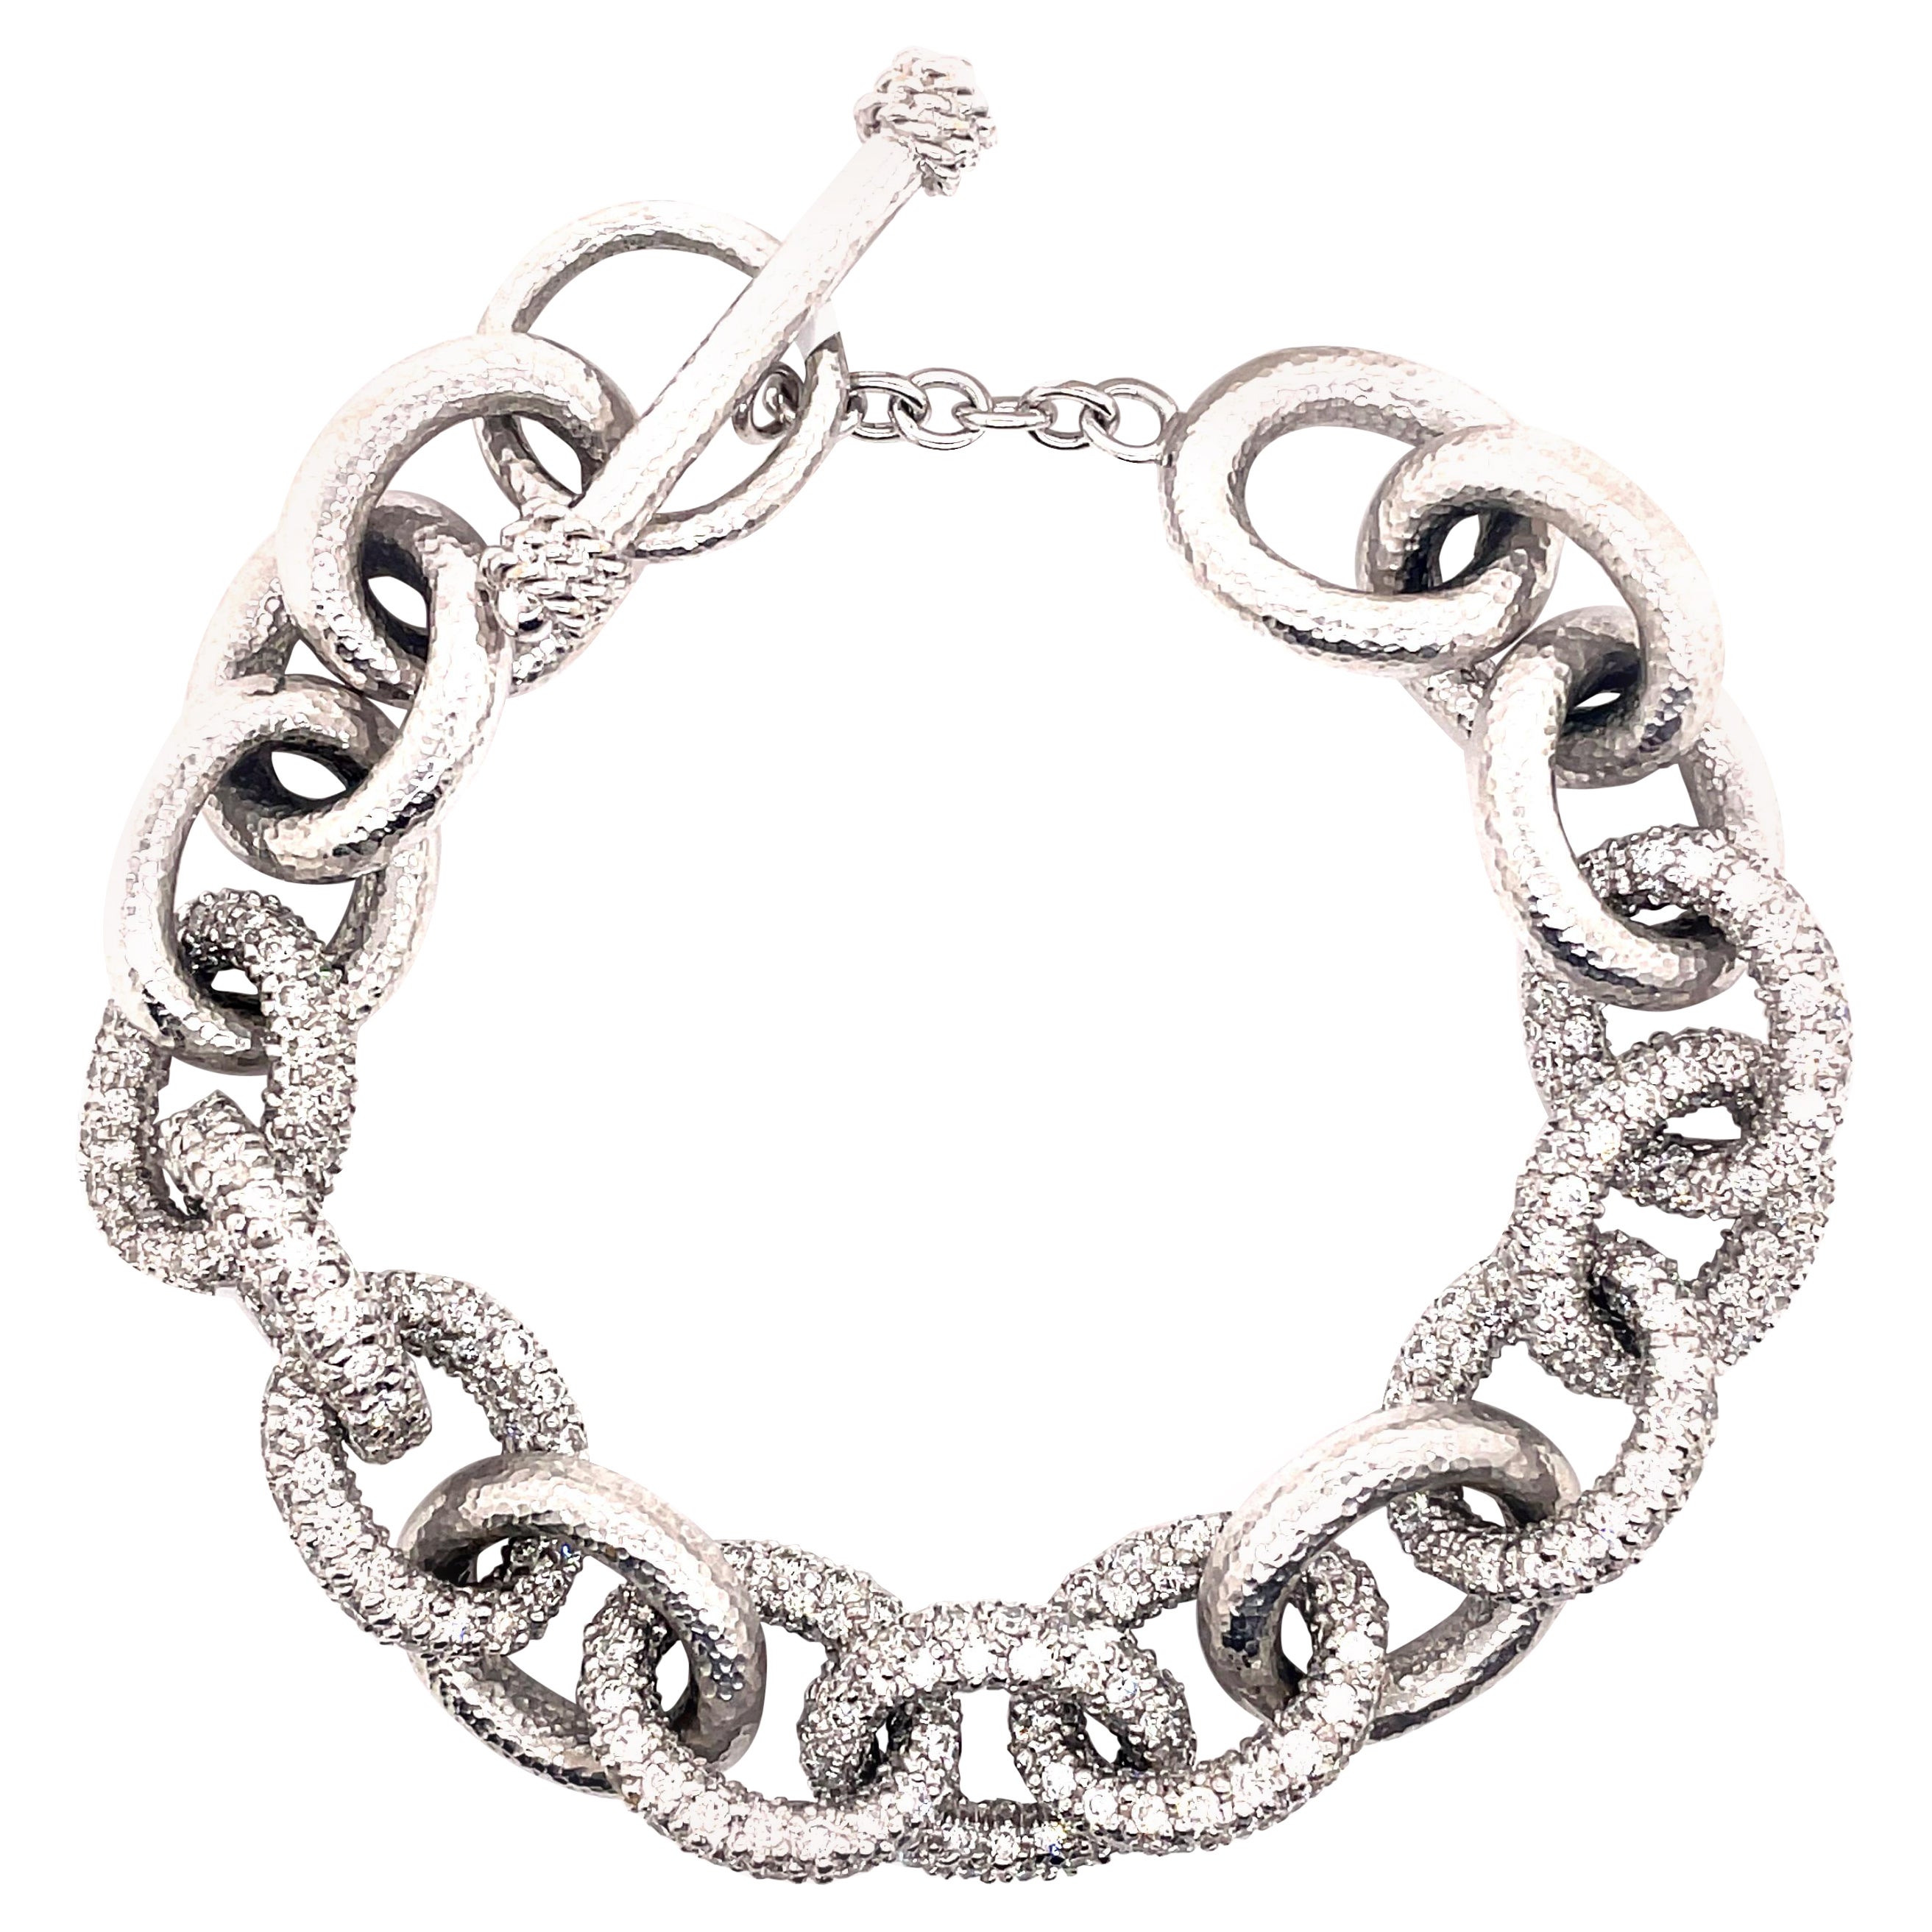 14.47 Carat Diamond Chain Pave and Hammer Finished Bracelet 18 Karat White Gold For Sale